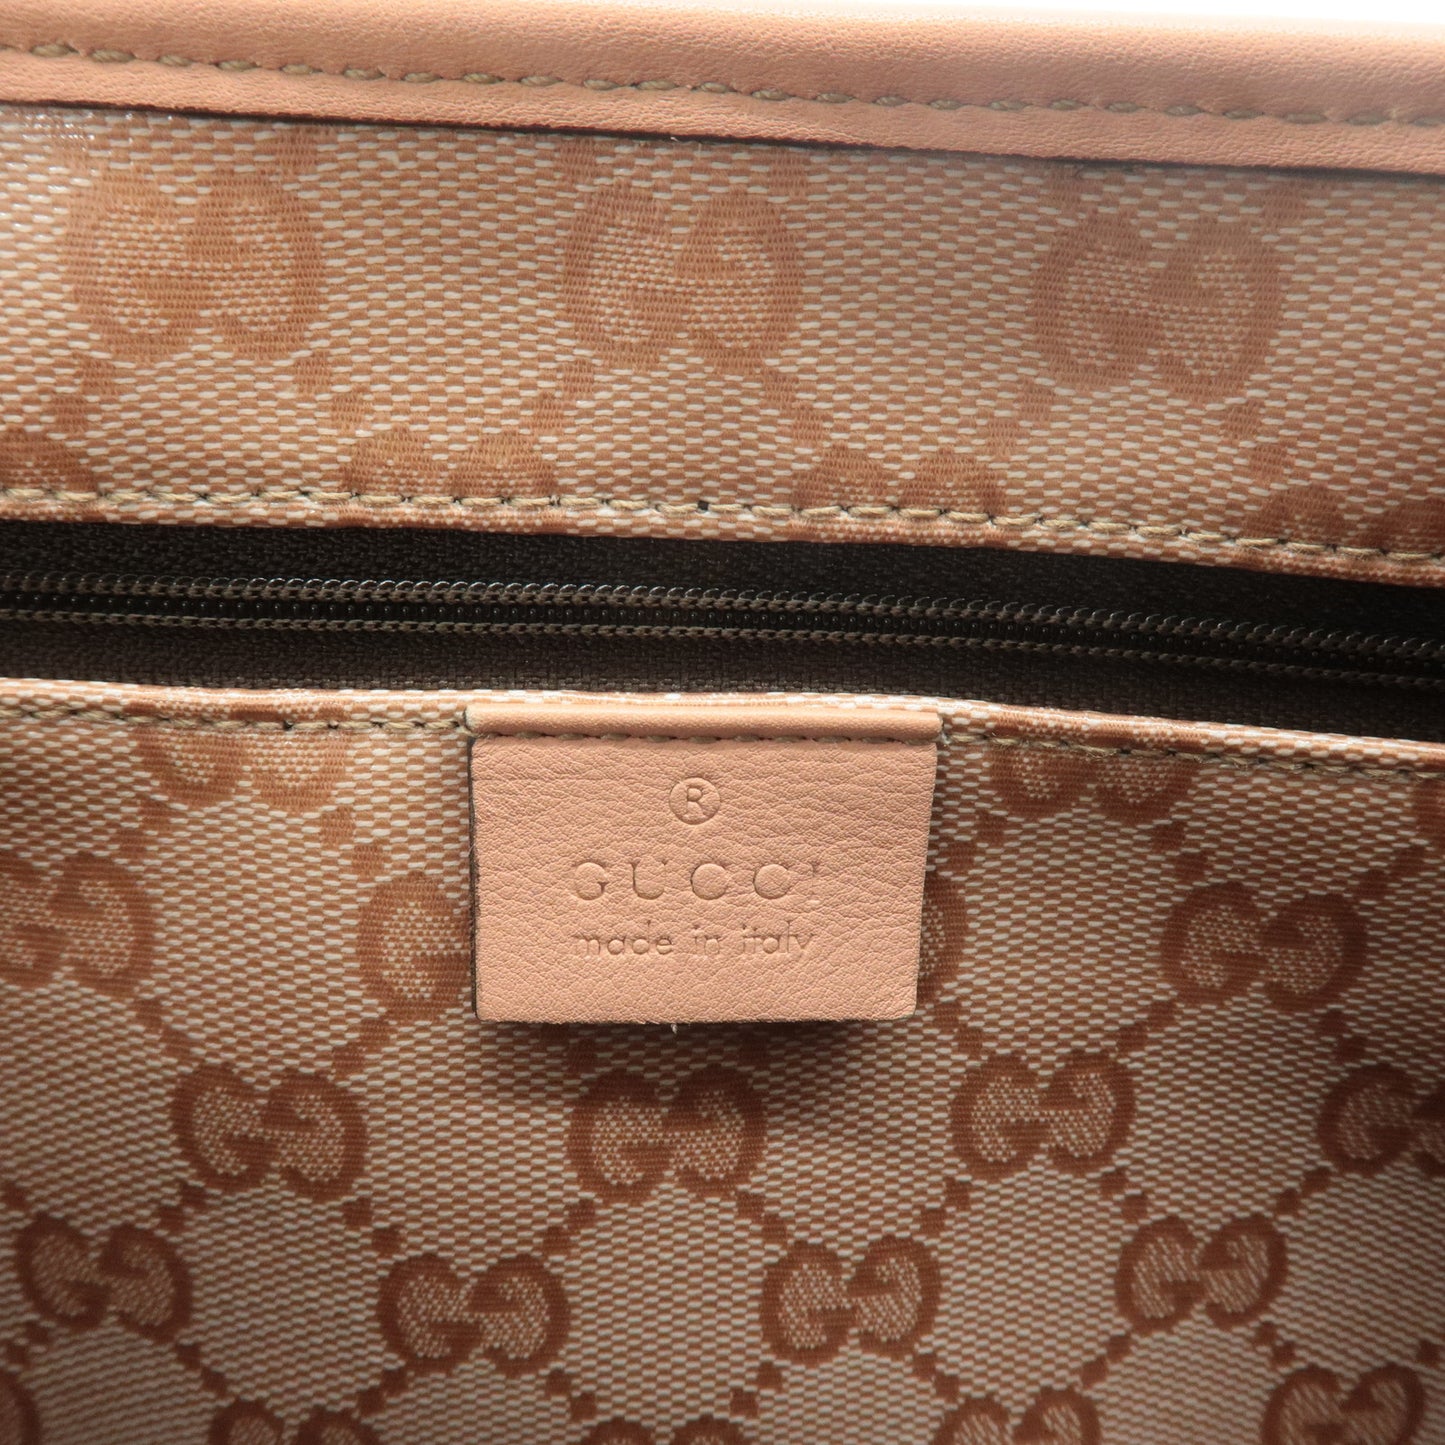 GUCCI Abbey GG Crystal Leather Tote Hand Bag Pink 130736